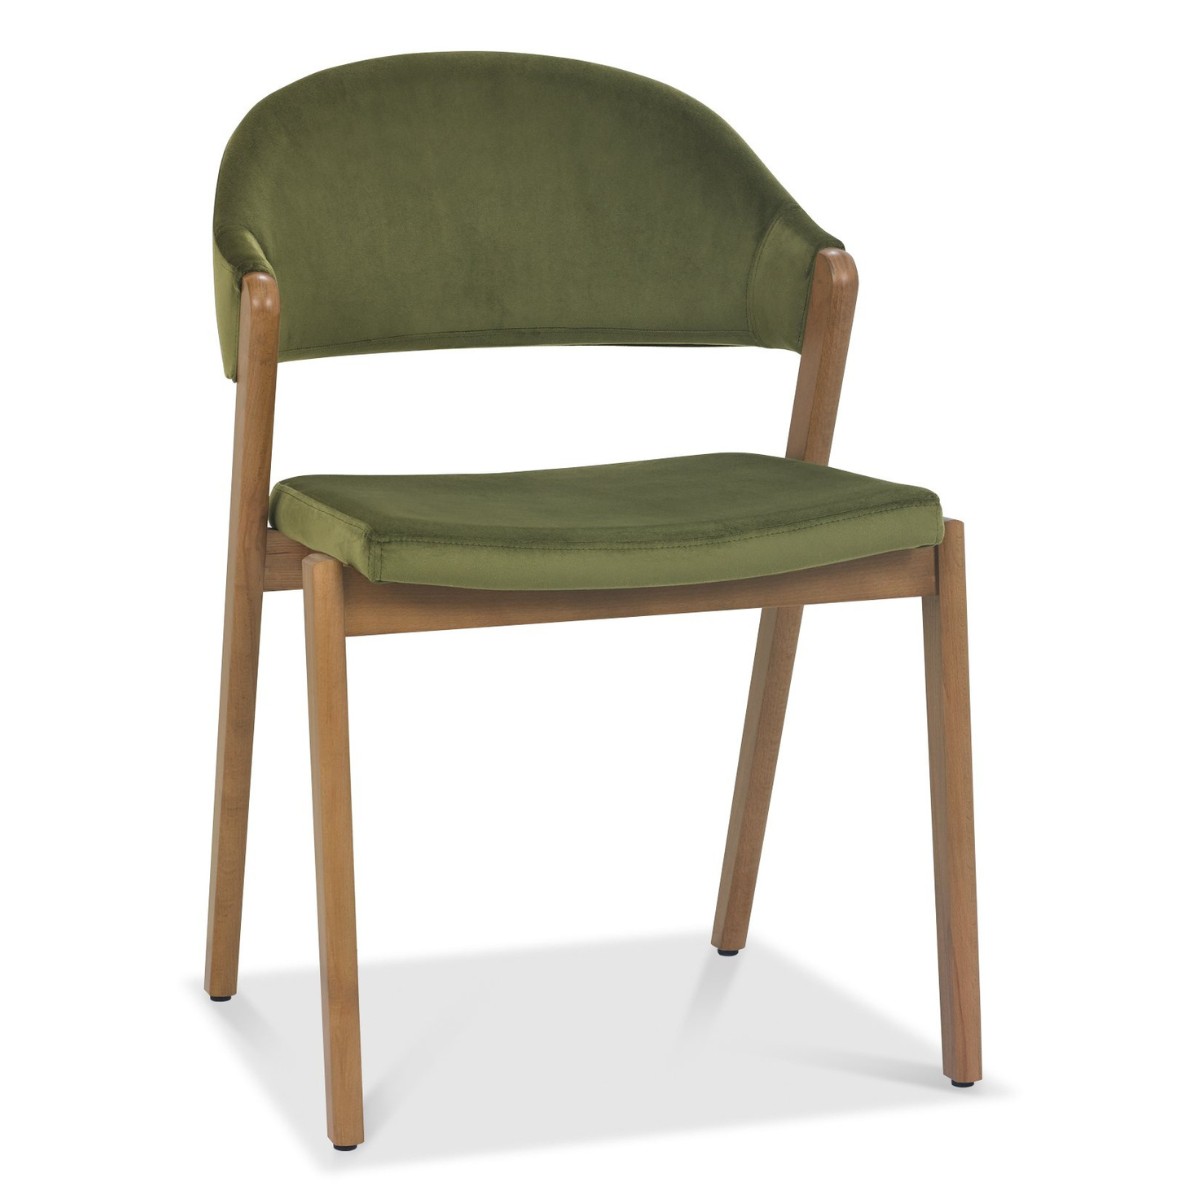 Chambery Rustic Oak Upholstered Dining Chair Green - 1